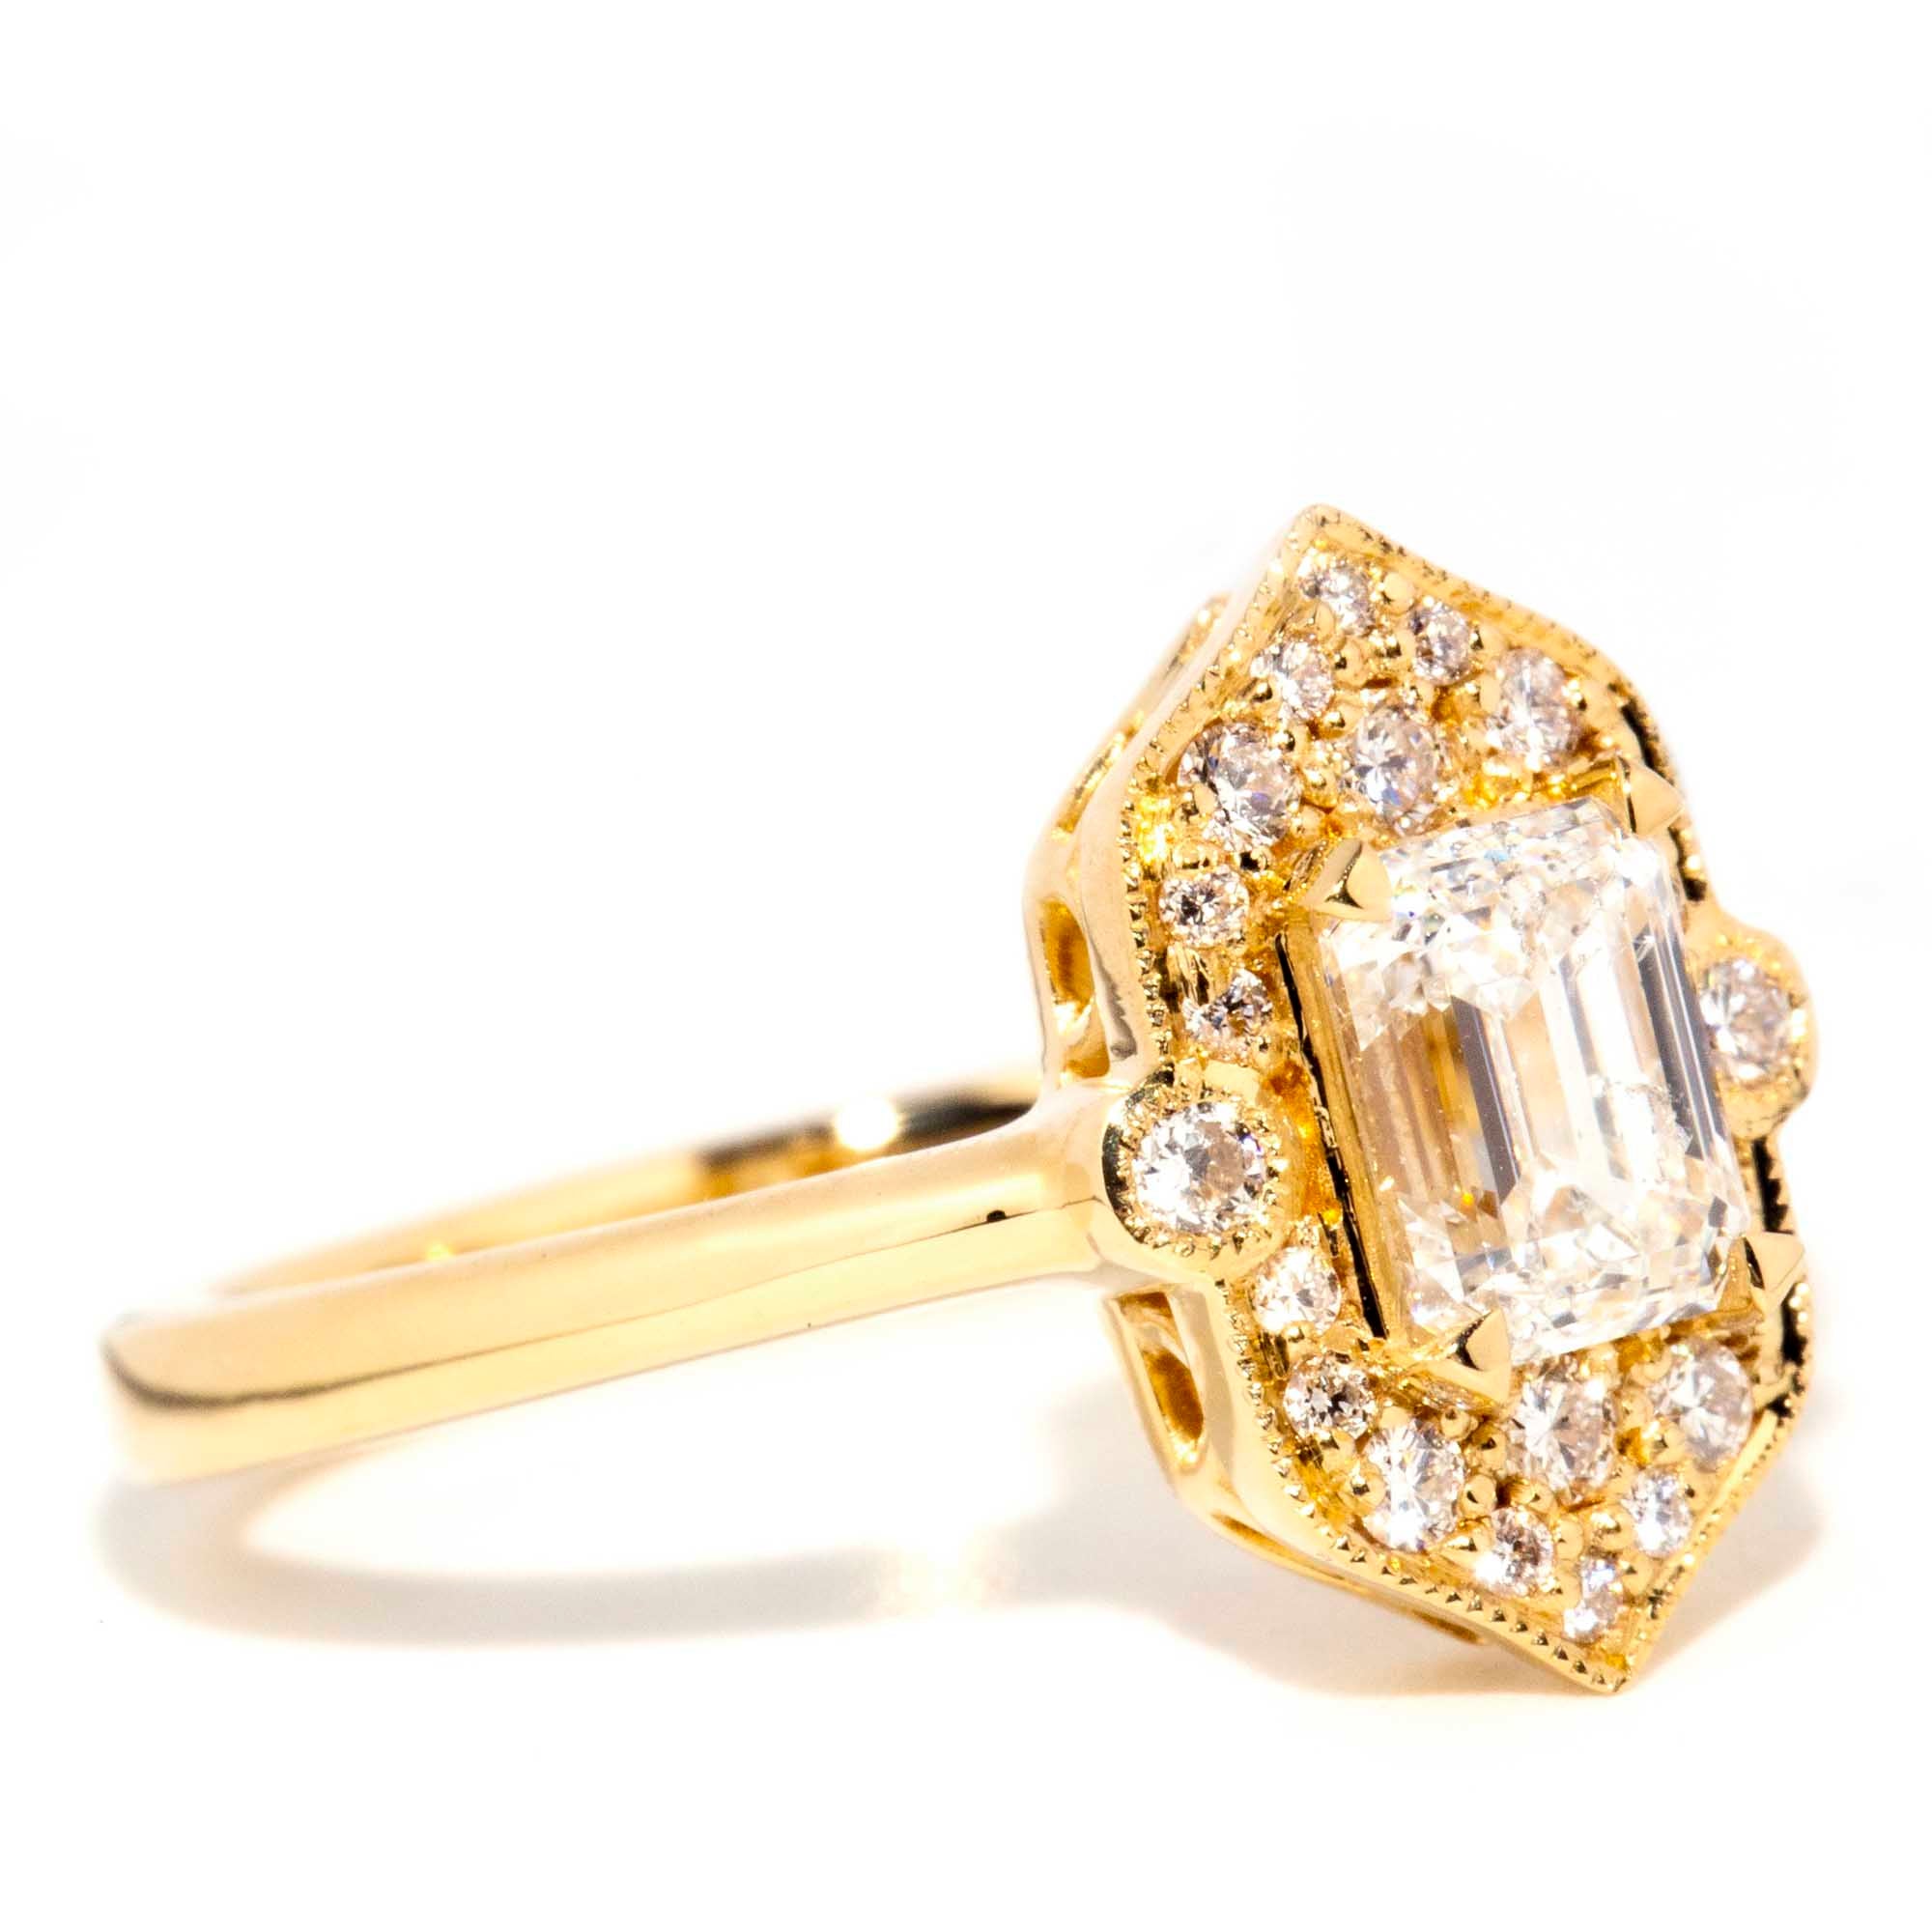 Juno 18ct Yellow Gold Emerald Cut Diamond Cluster Ring* OB Gemmo $ Rings Imperial Jewellery 